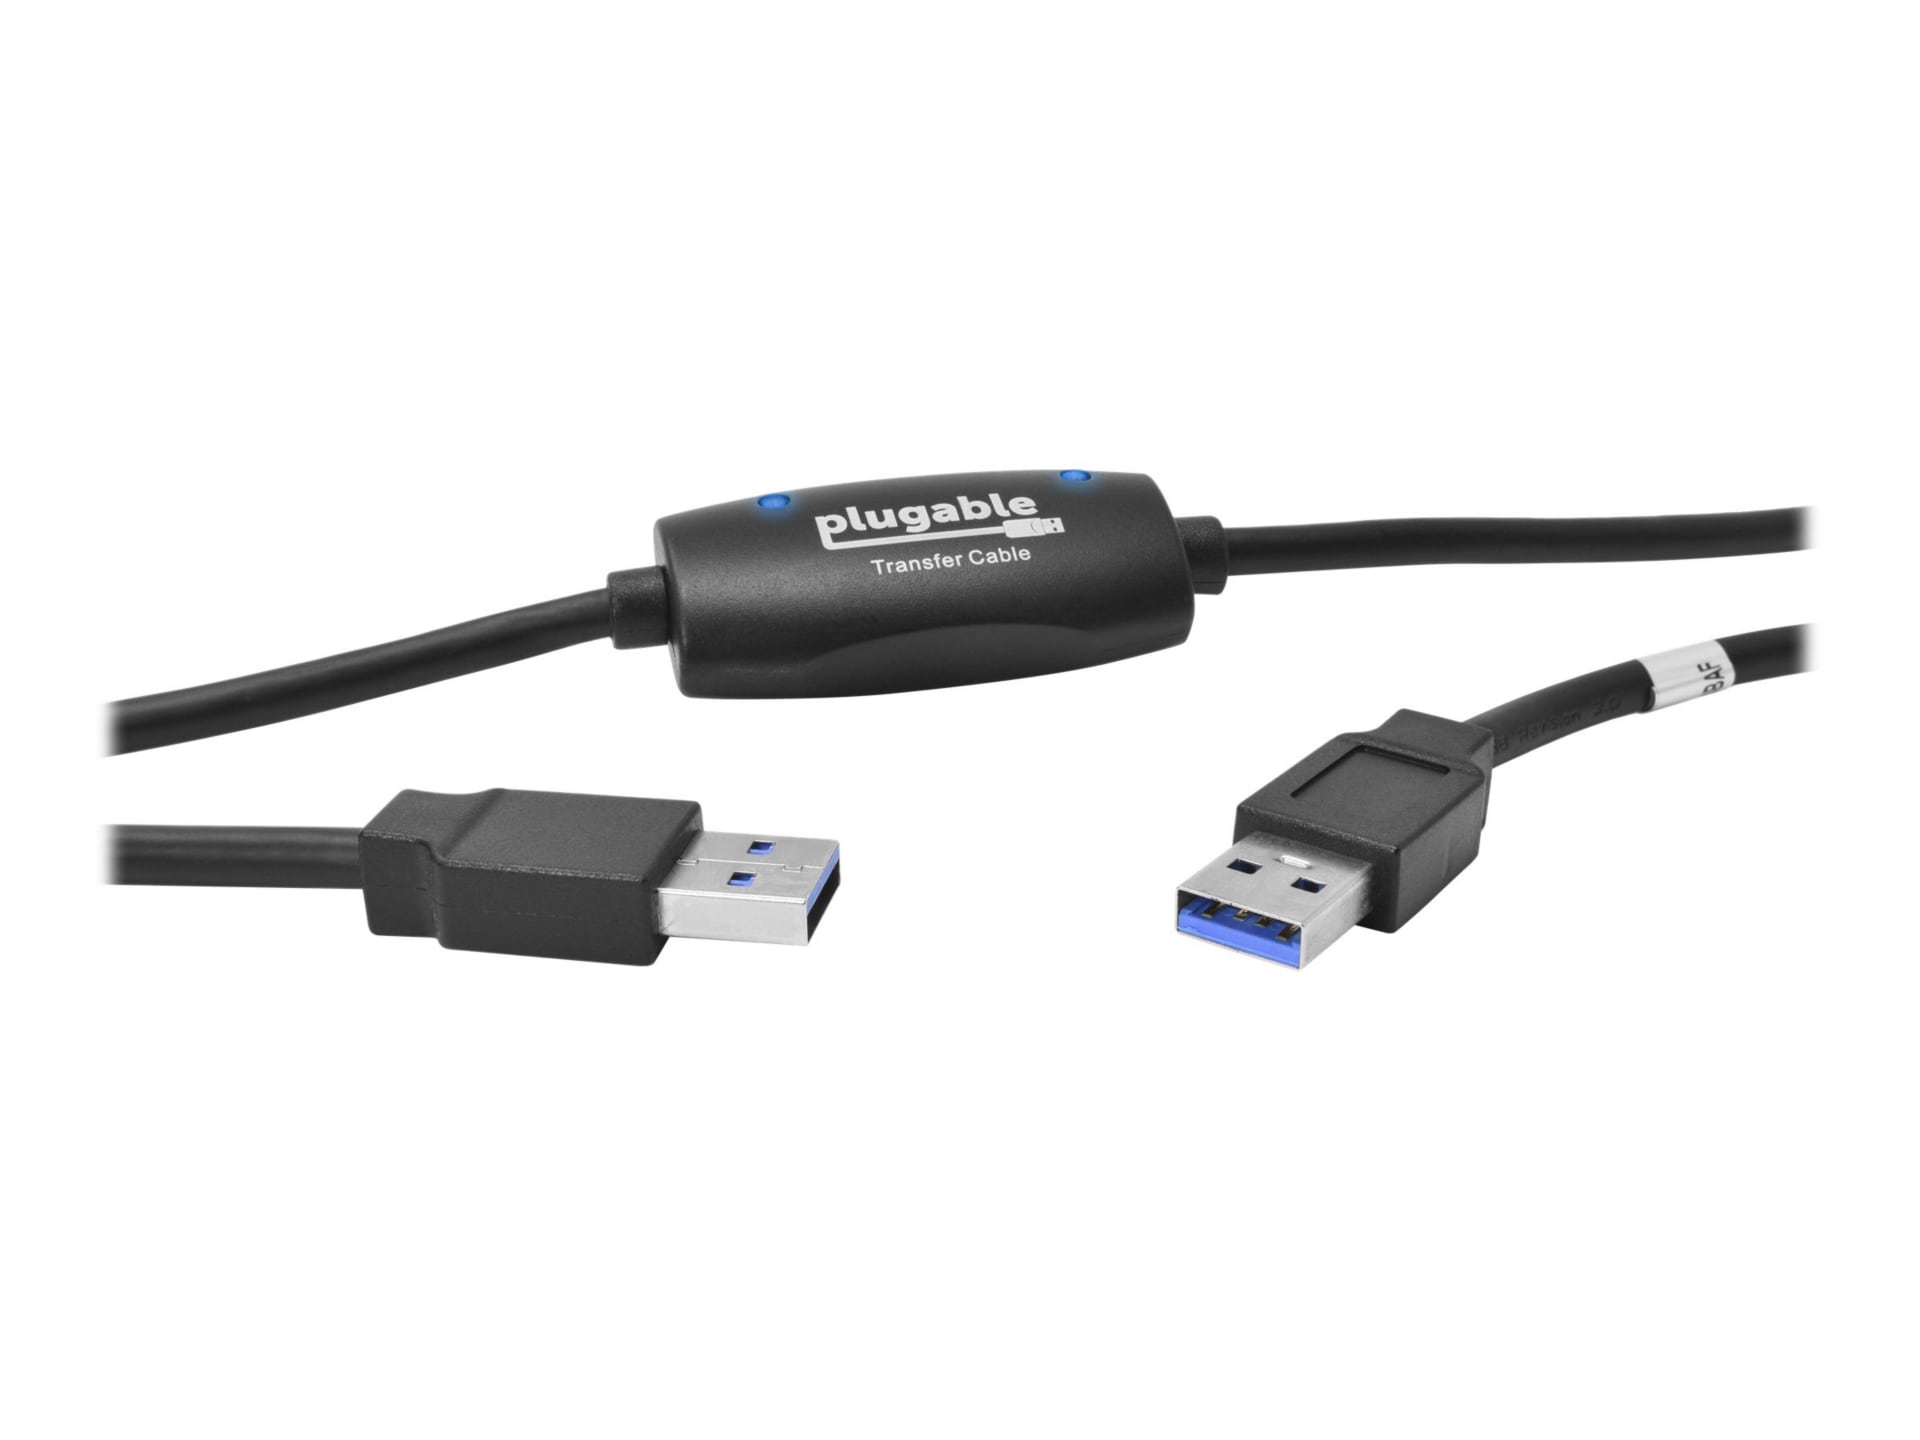 Plugable USB 3.0 Easy Transfer Cable for Windows